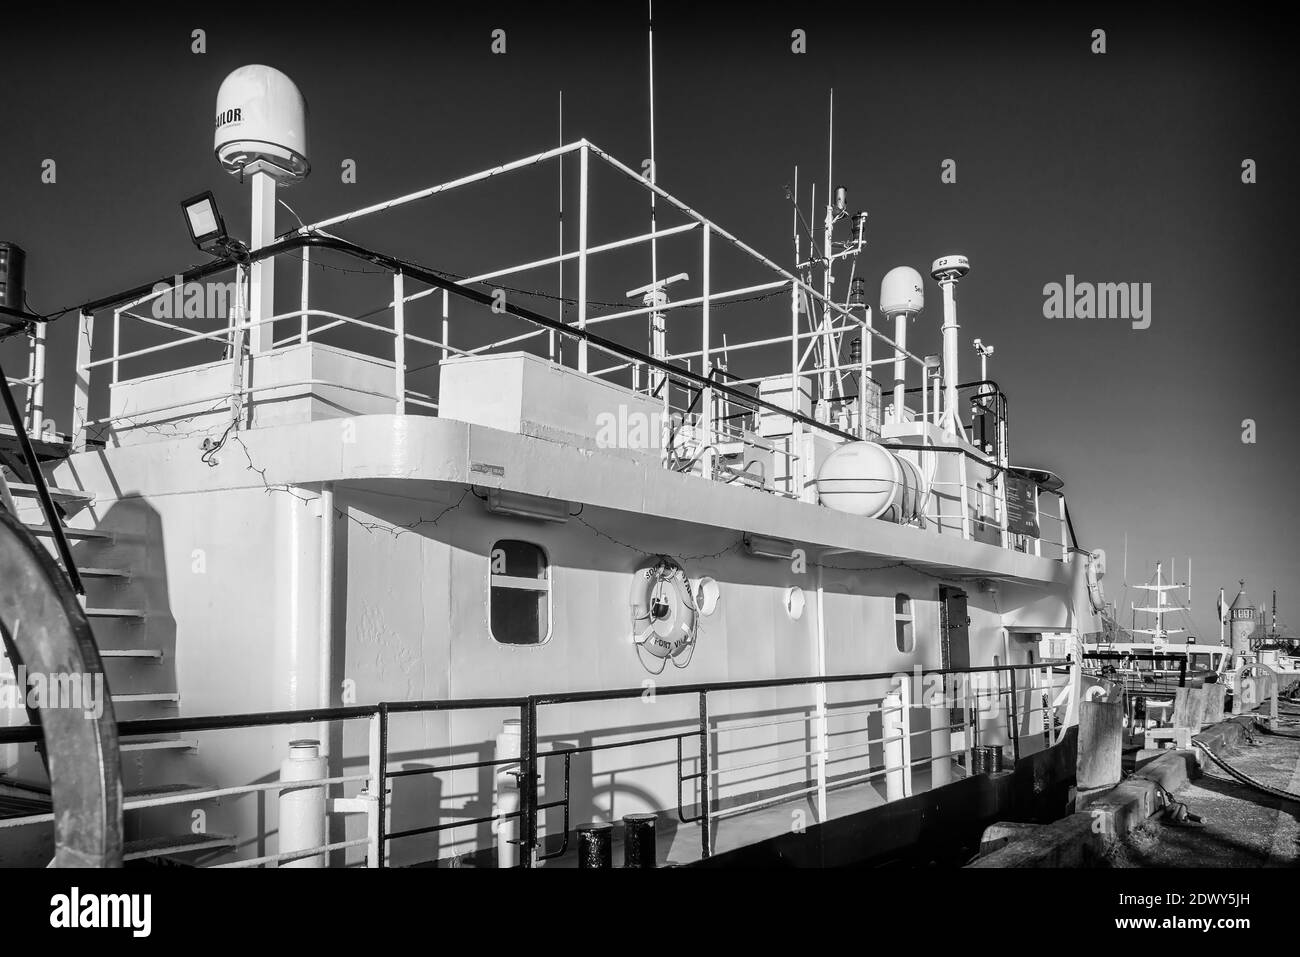 A boat moored in a harbour with a the light from a low sun onto its starboard side.  The upper deck bristles with antenna and radar. Stock Photo